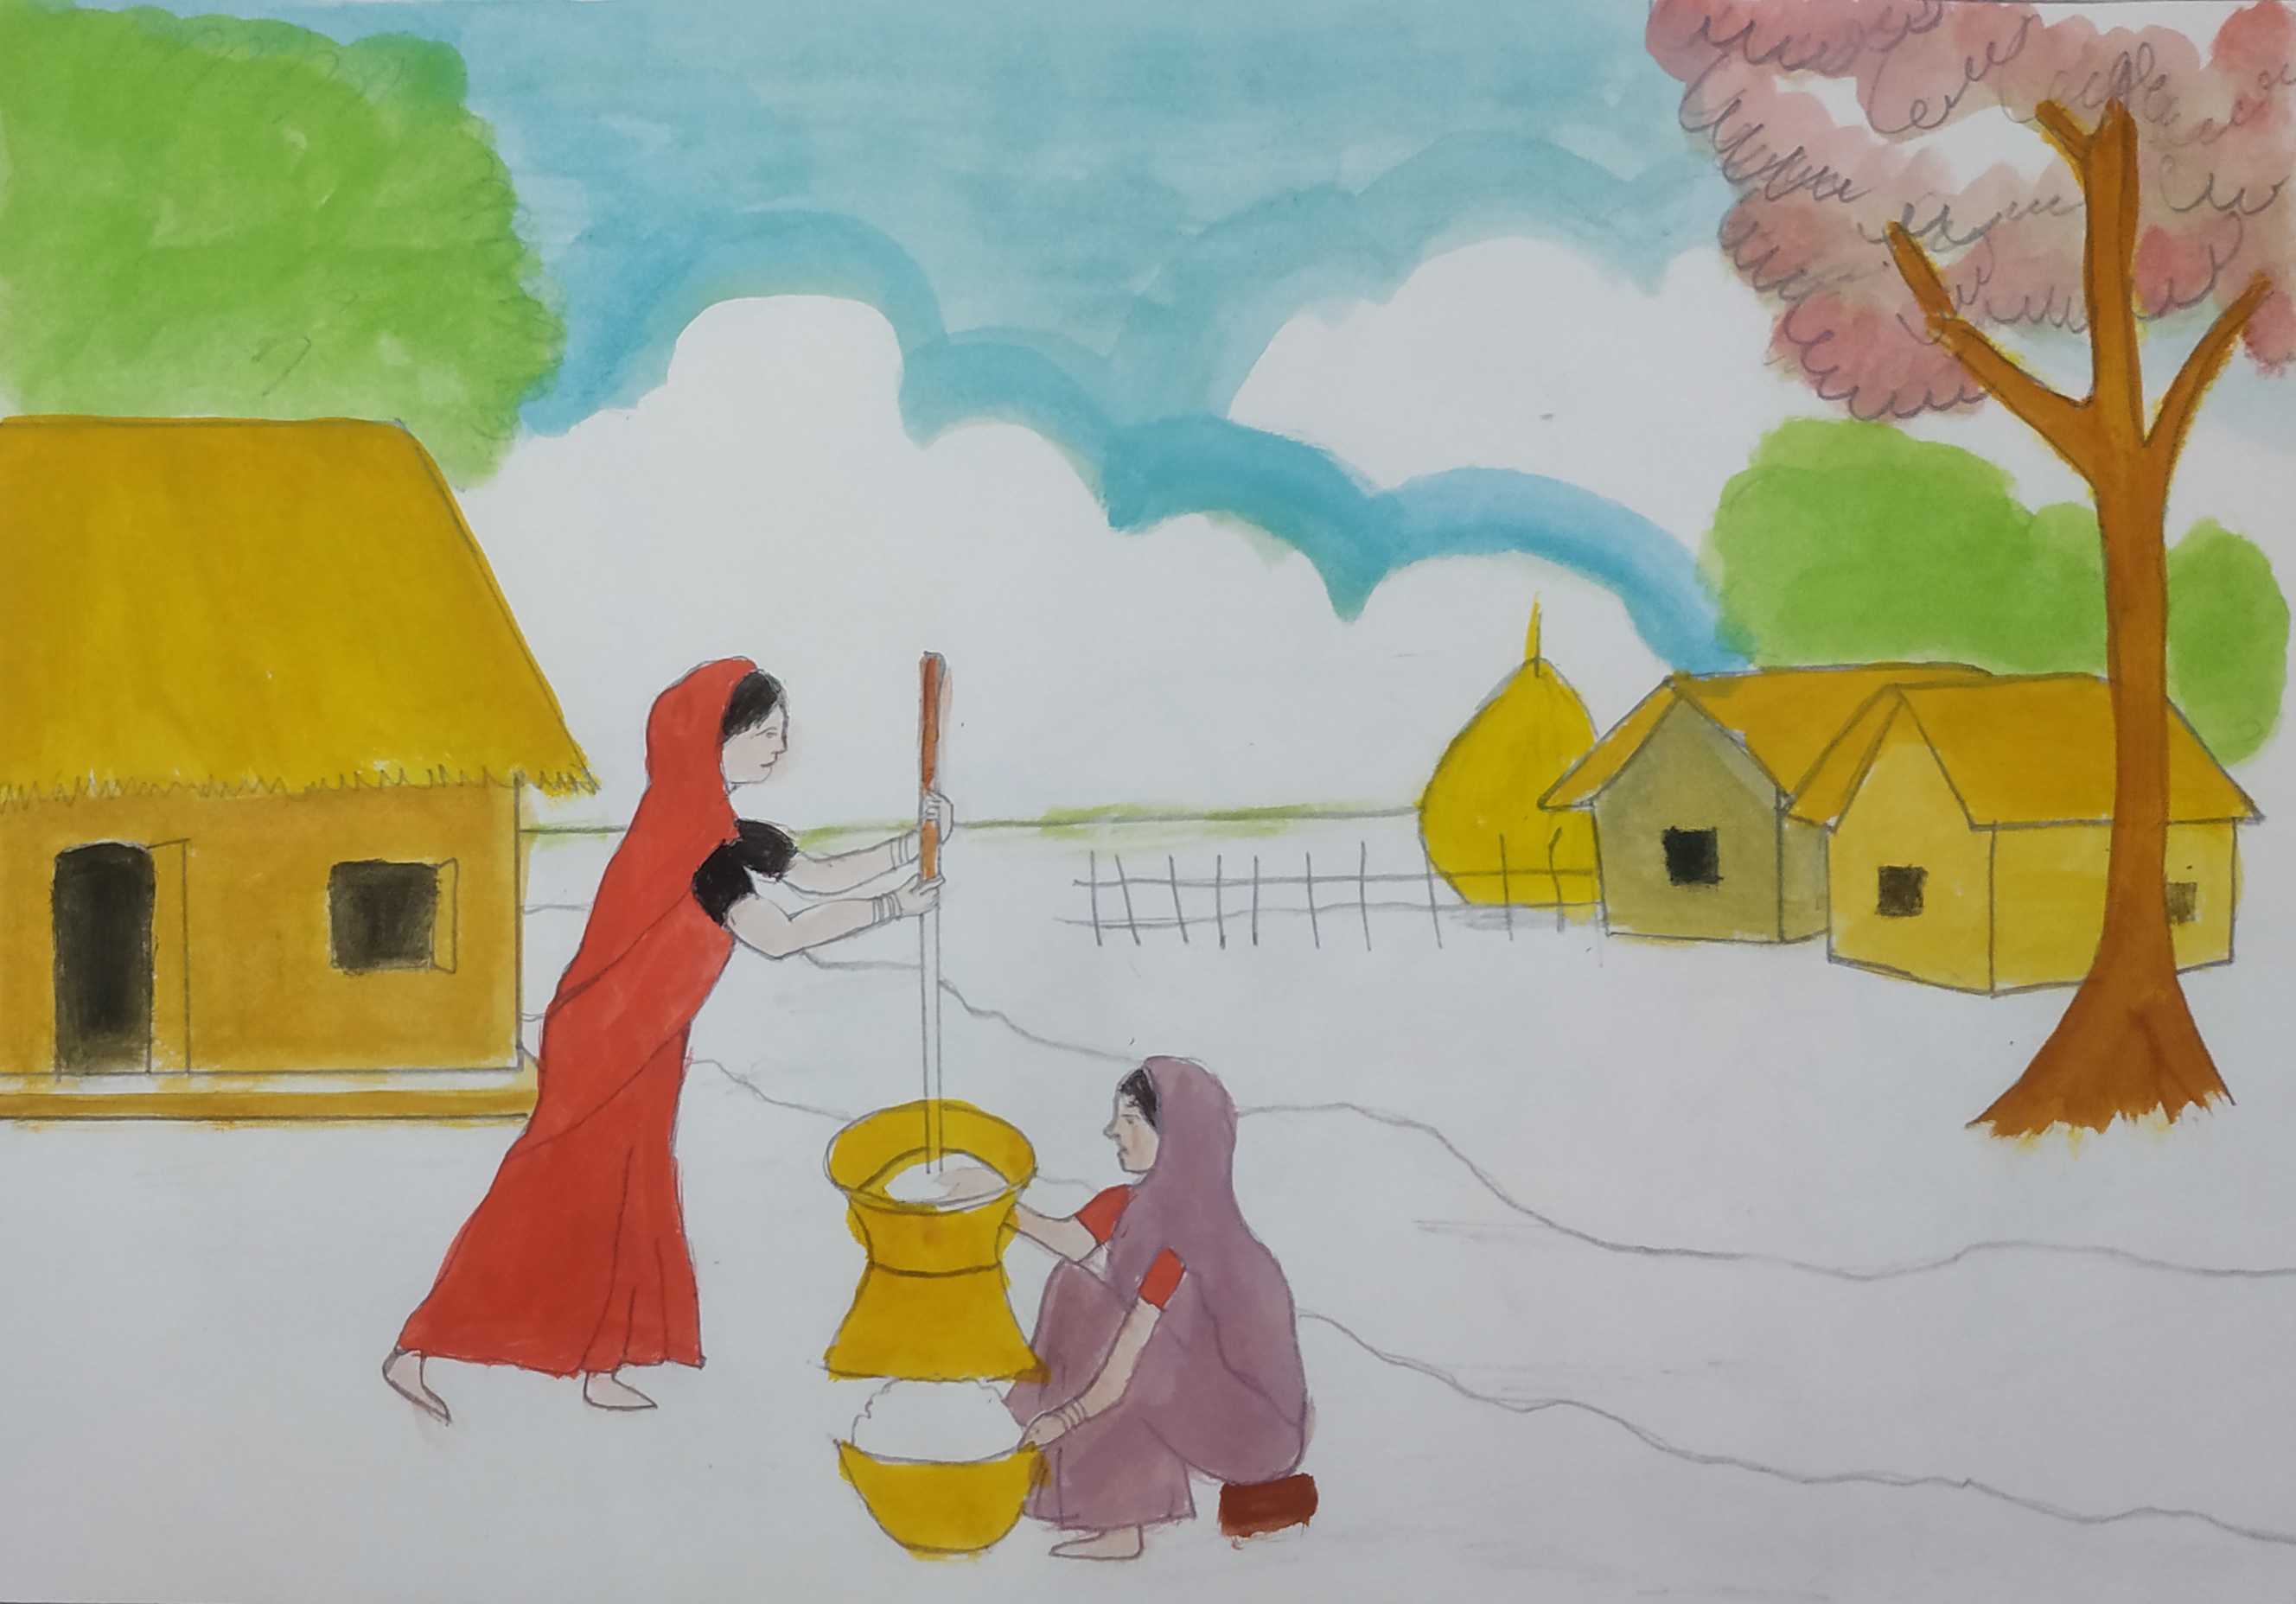 Village scenery Greeting Card by Dia Biswas